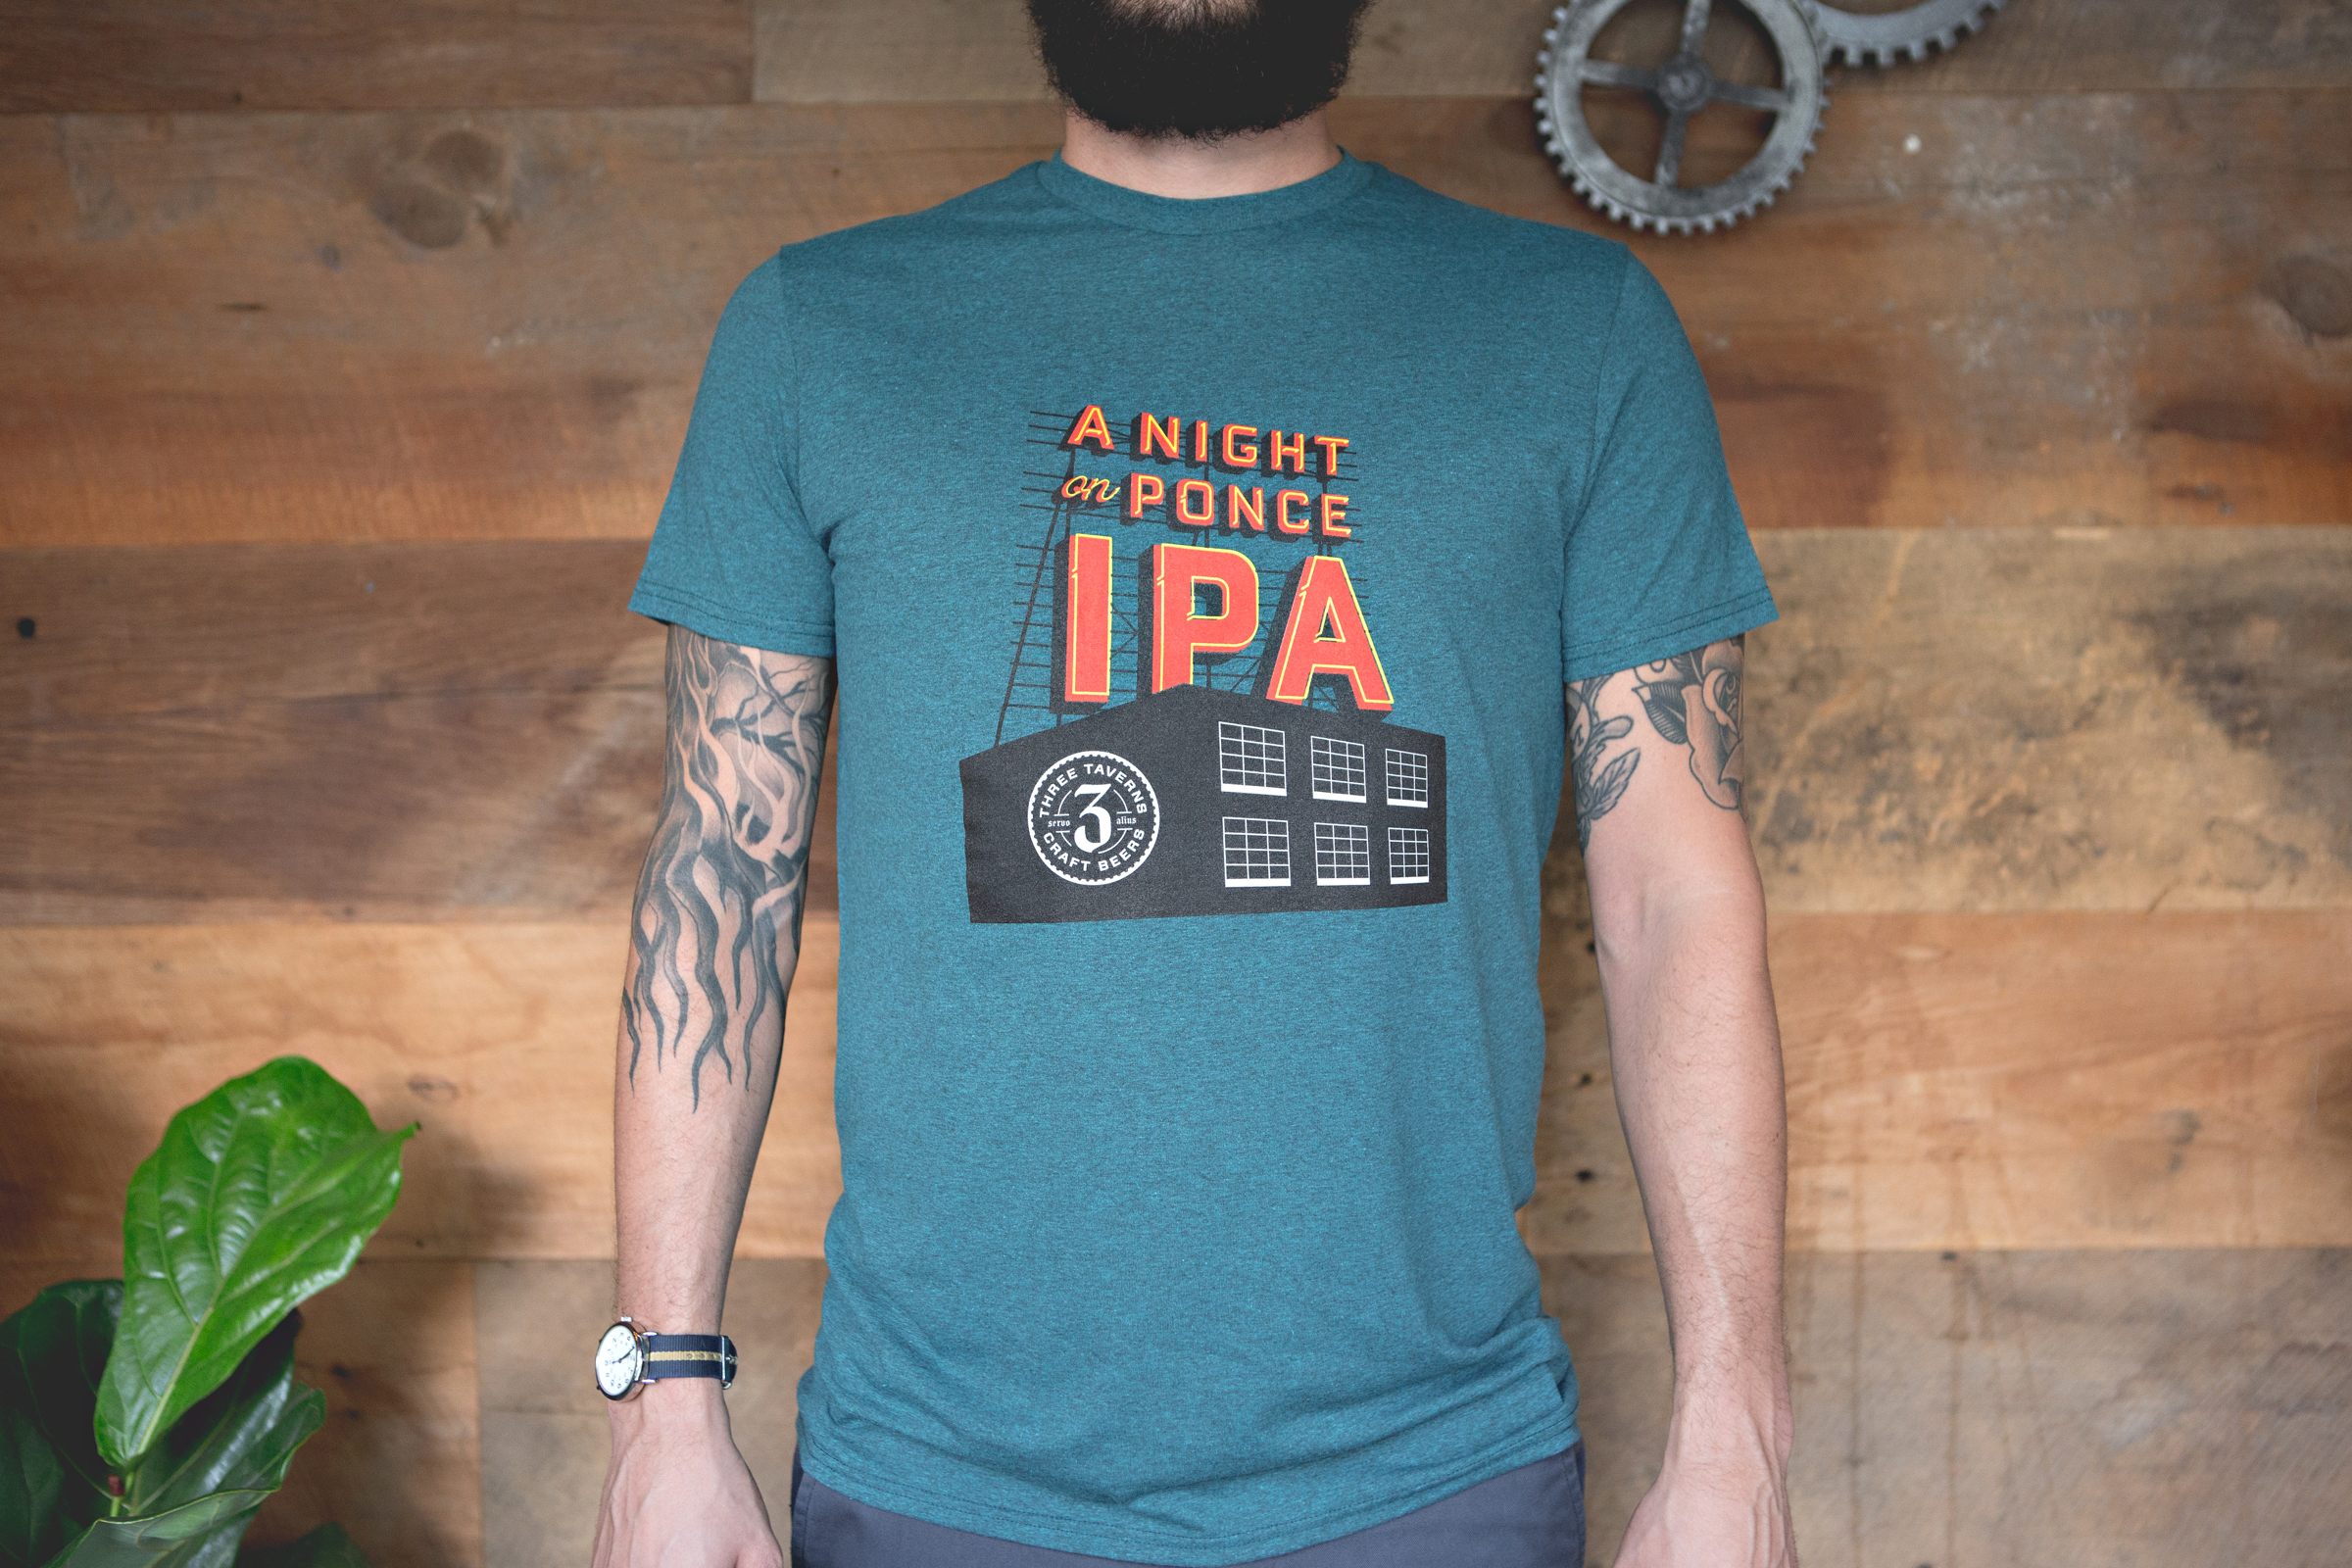 brewery t shirts